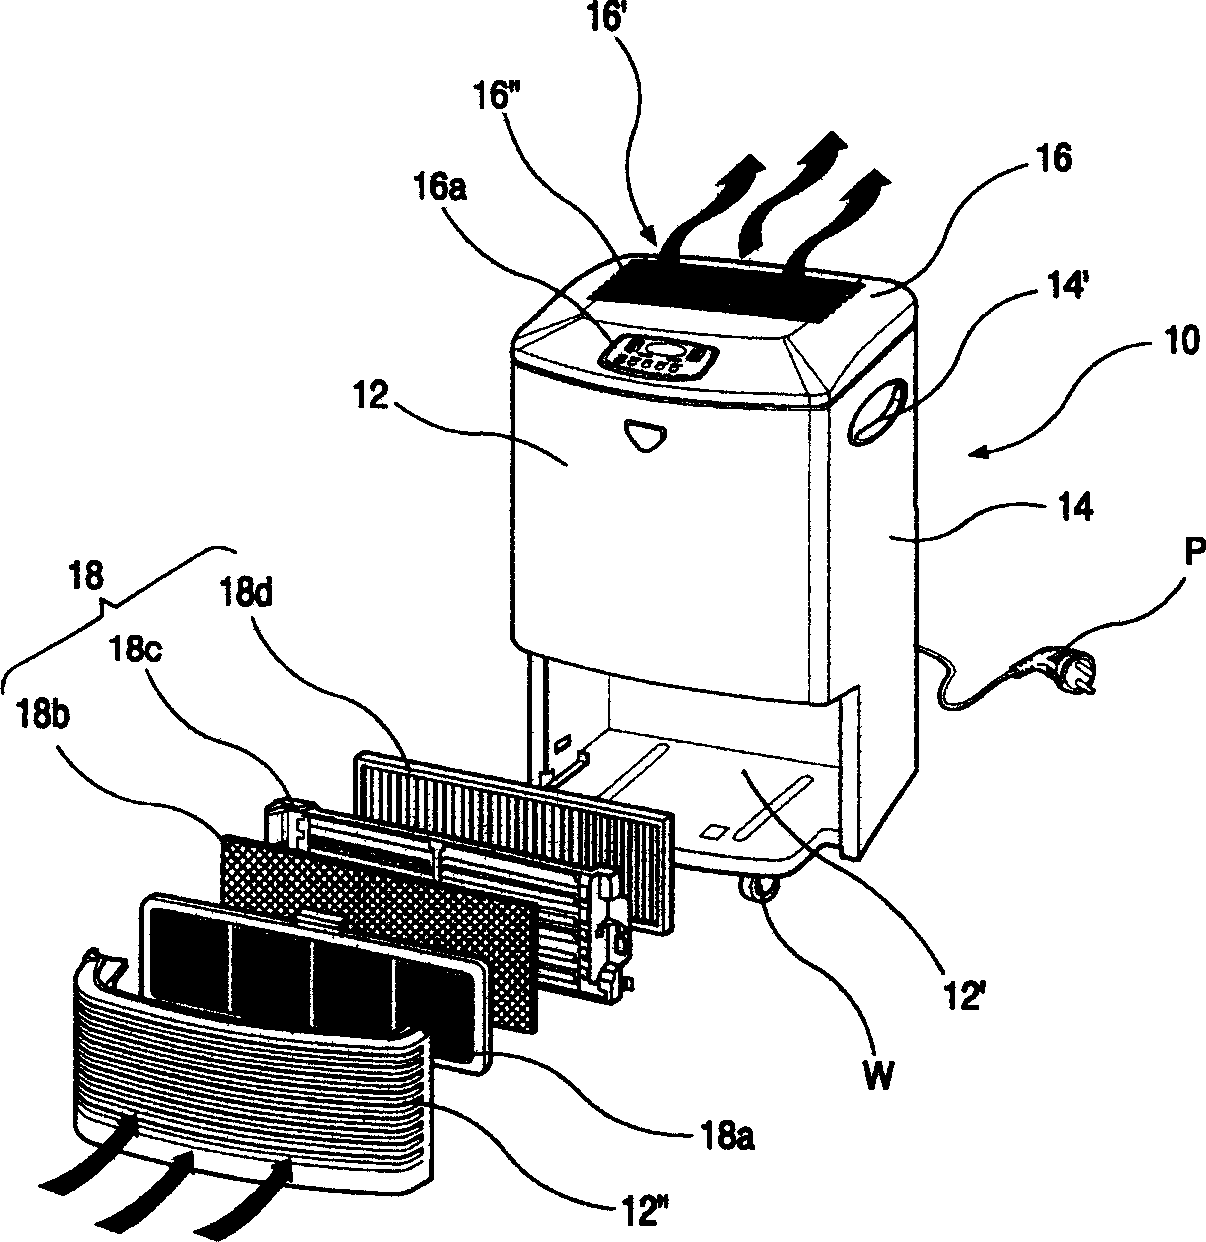 Structure of filter subassembly in air cleaner